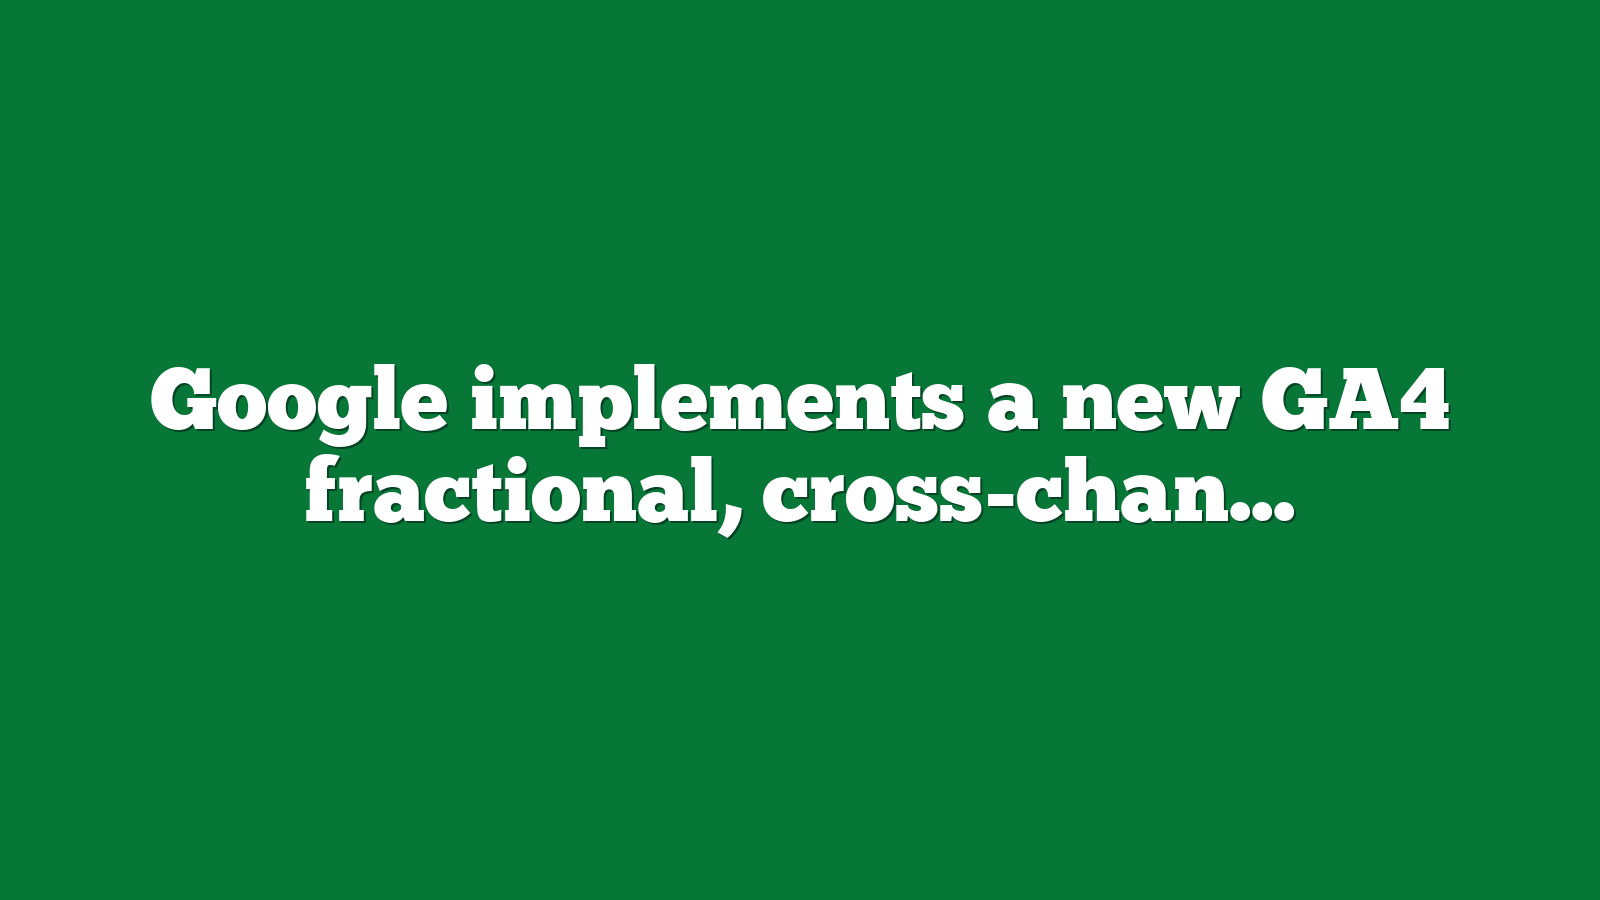 Google implements a new GA4 fractional, cross-channel web conversions feature